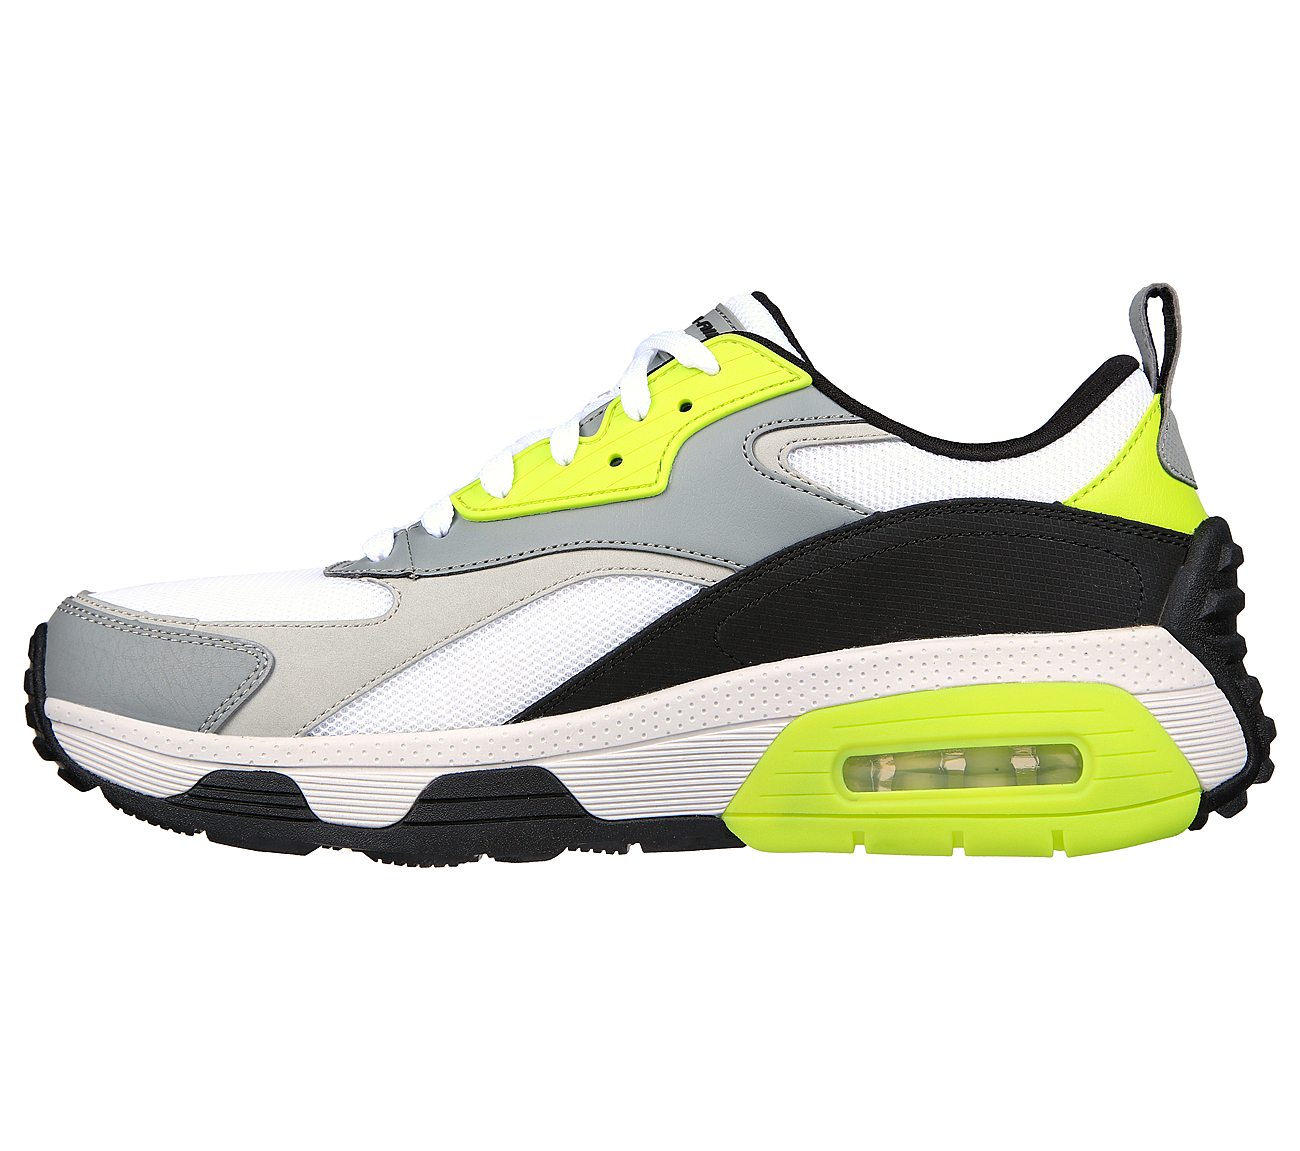 SKECH-AIR EXTREME V2, WHITE/BLACK/LIME Footwear Left View